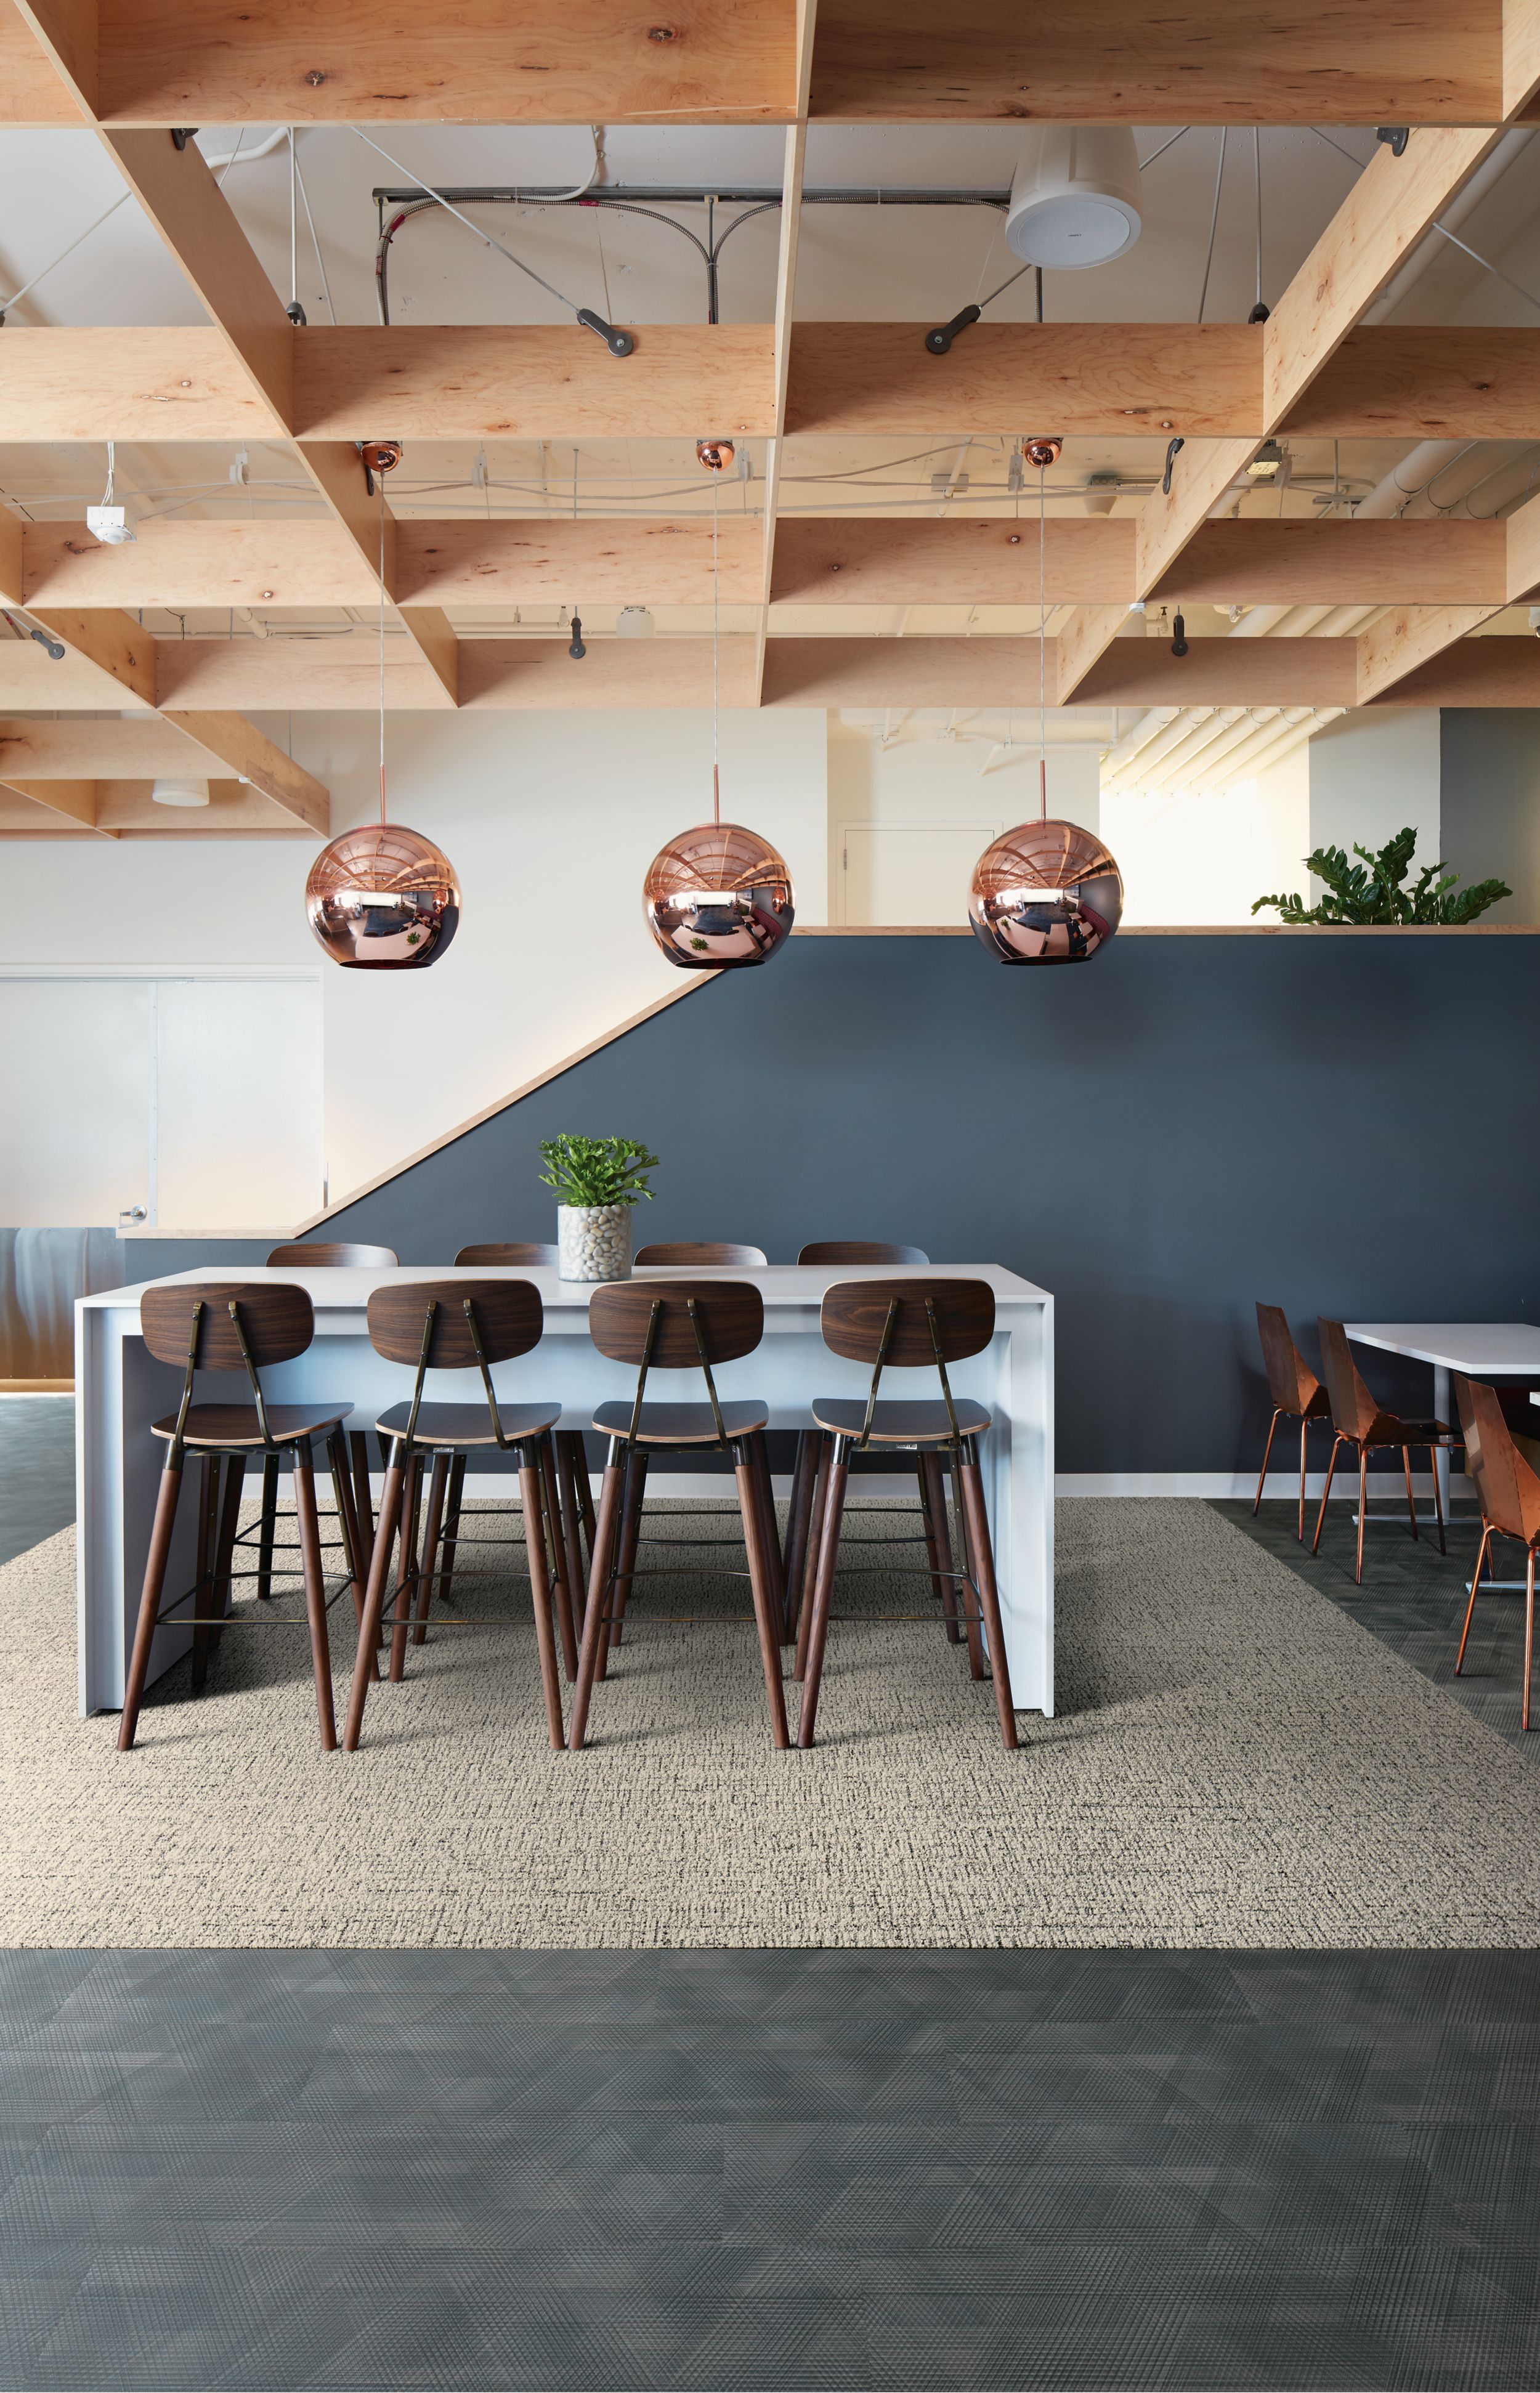 Interface Haptic plank carpet tile and Drawn Lines LVT in public office space with wood grid ceiling Bildnummer 2